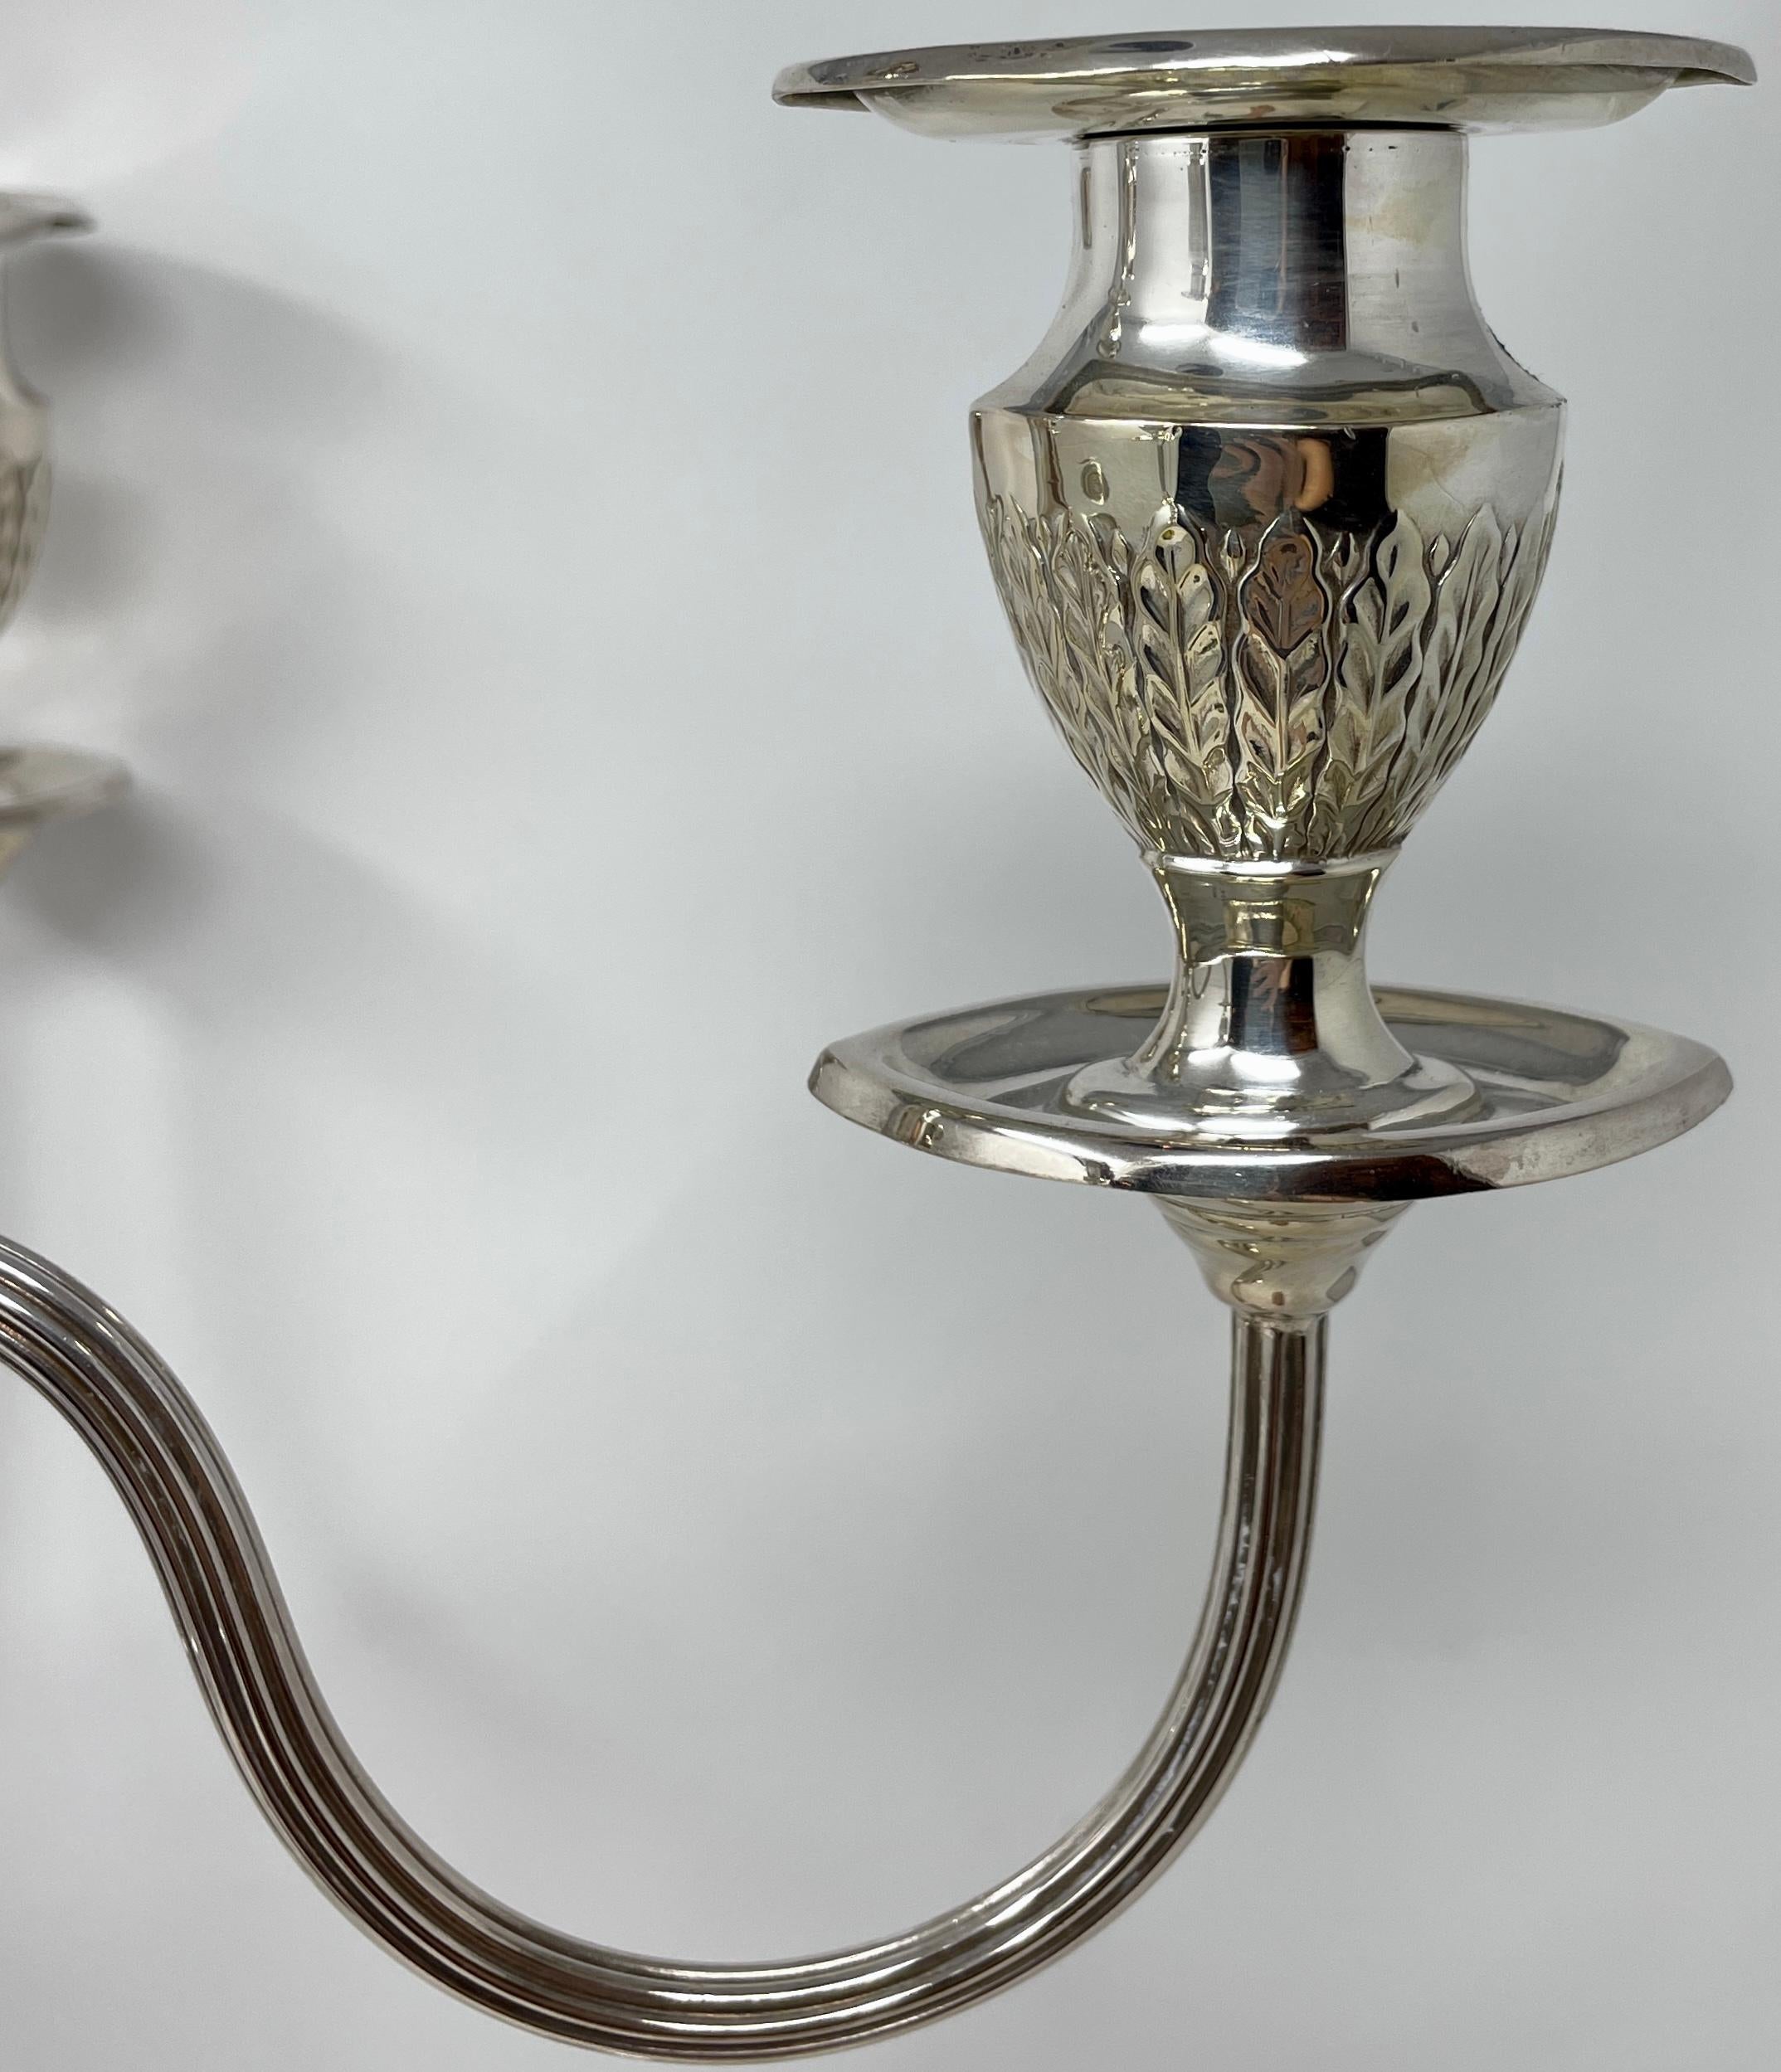 20th Century Pair Antique English Edwardian 5-Light Silver-Plated Candelabra, Circa 1900-1910 For Sale